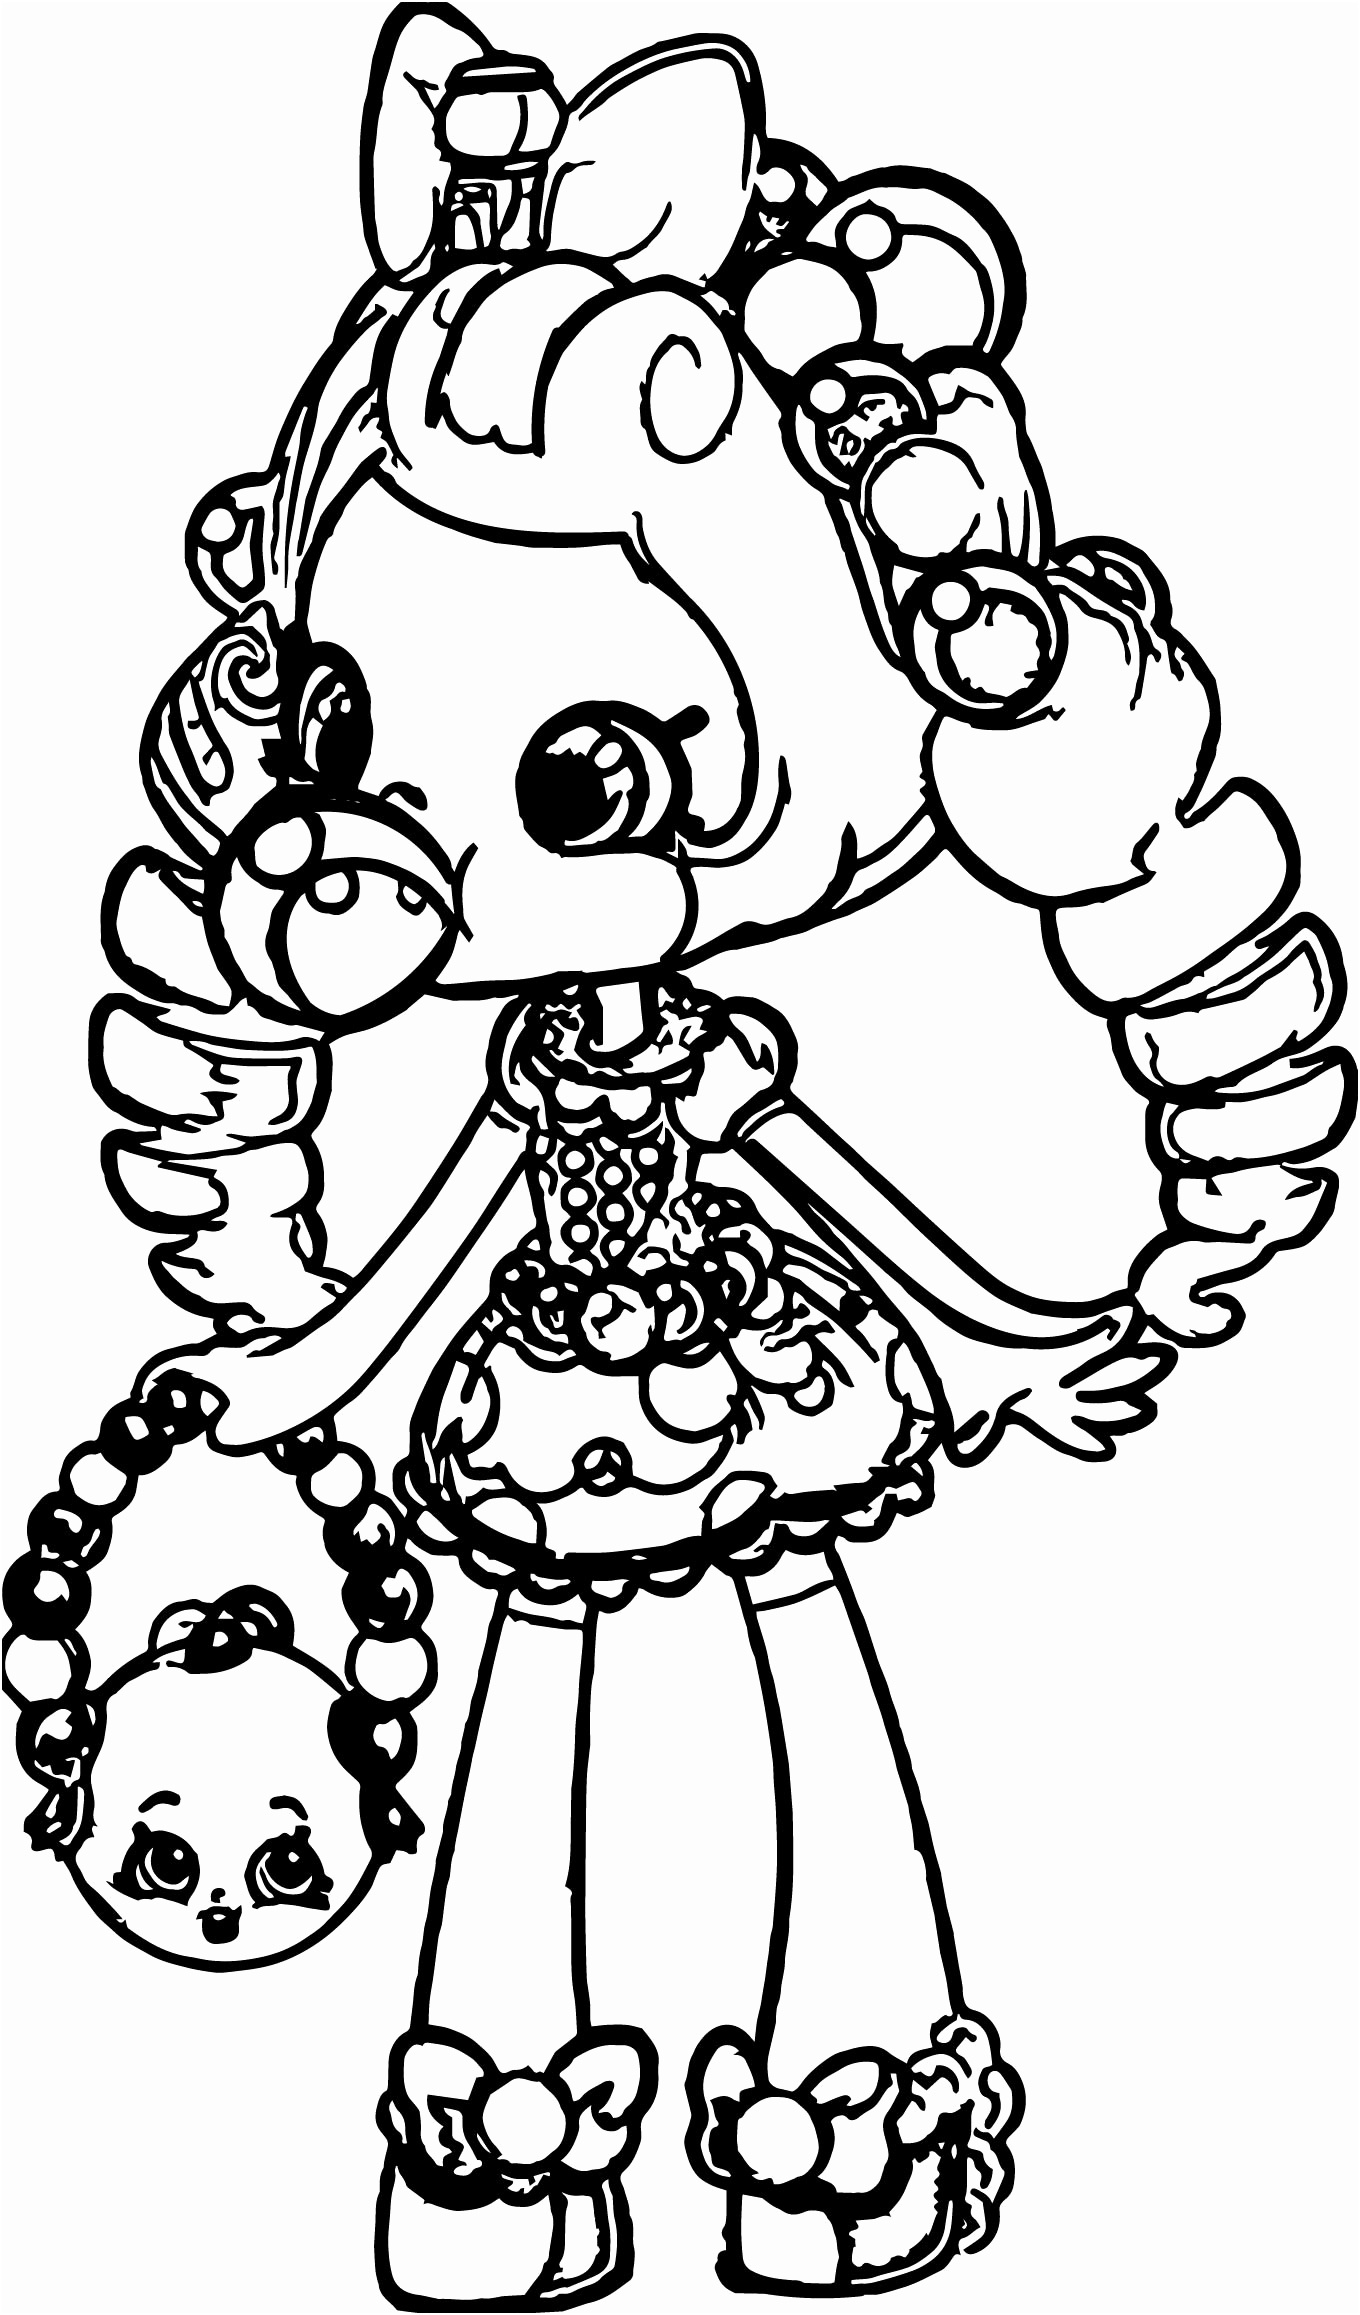 shoppie dolls coloring pages